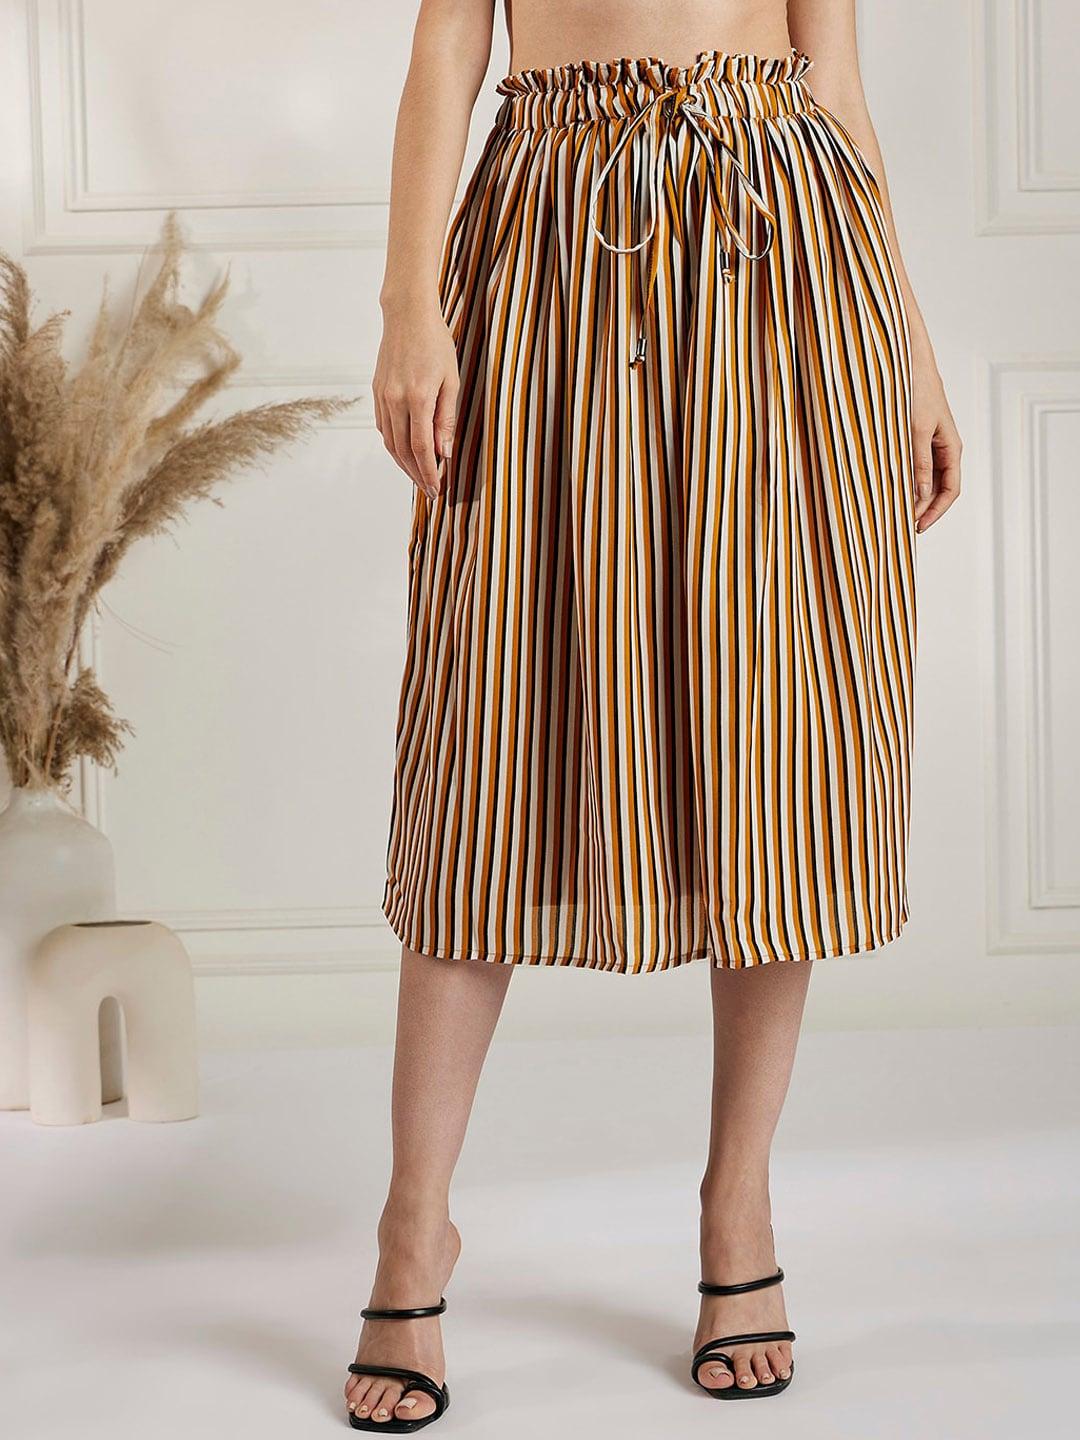 marie claire mustard yellow & black striped a-line midi skirt